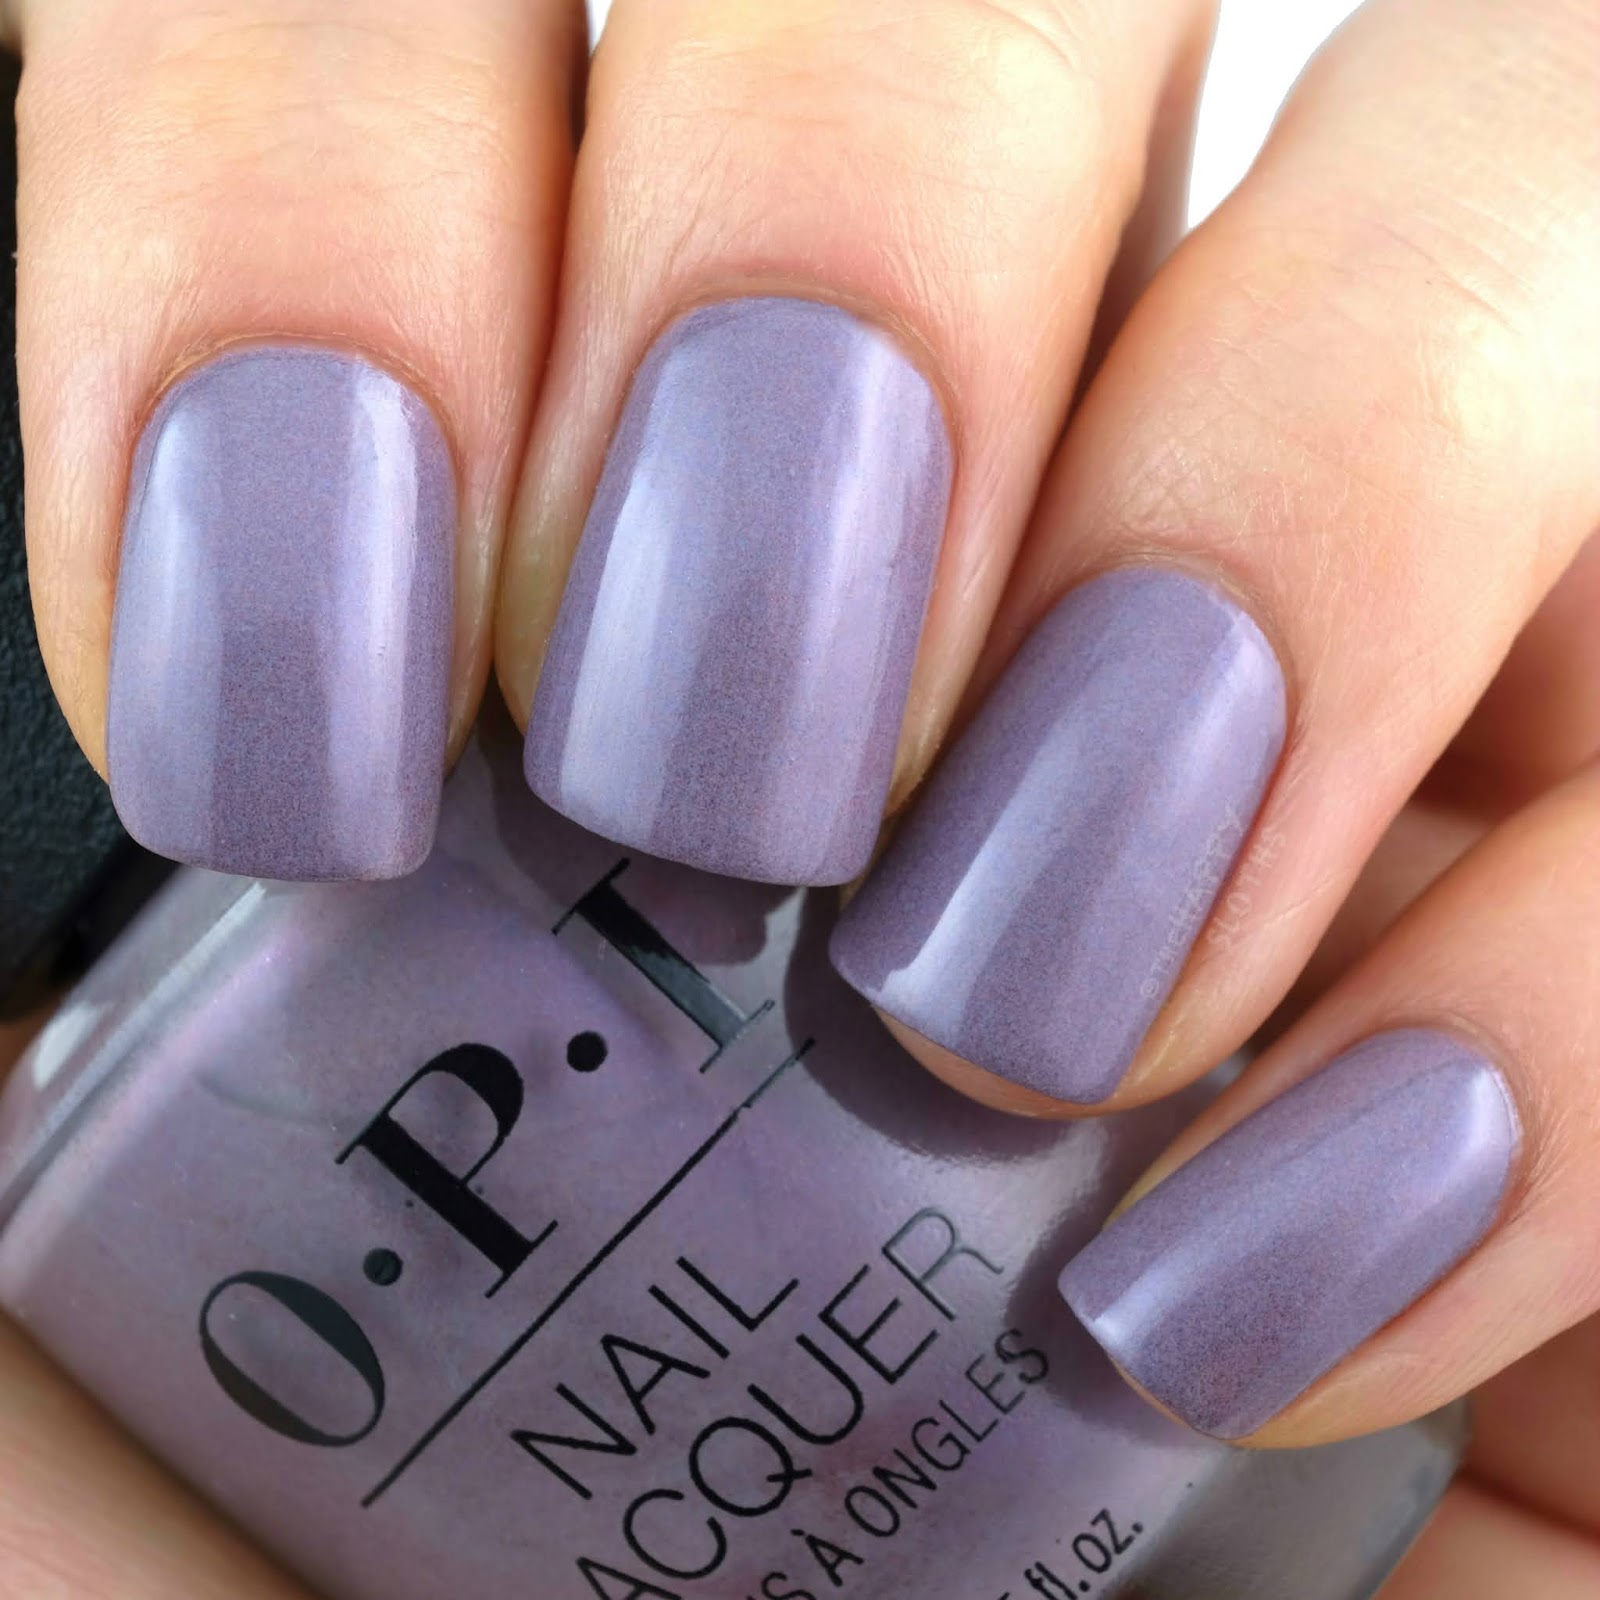 OPI Fall 2020 | Addio Bad Nails, Ciao Great Nails: Review and Swatches